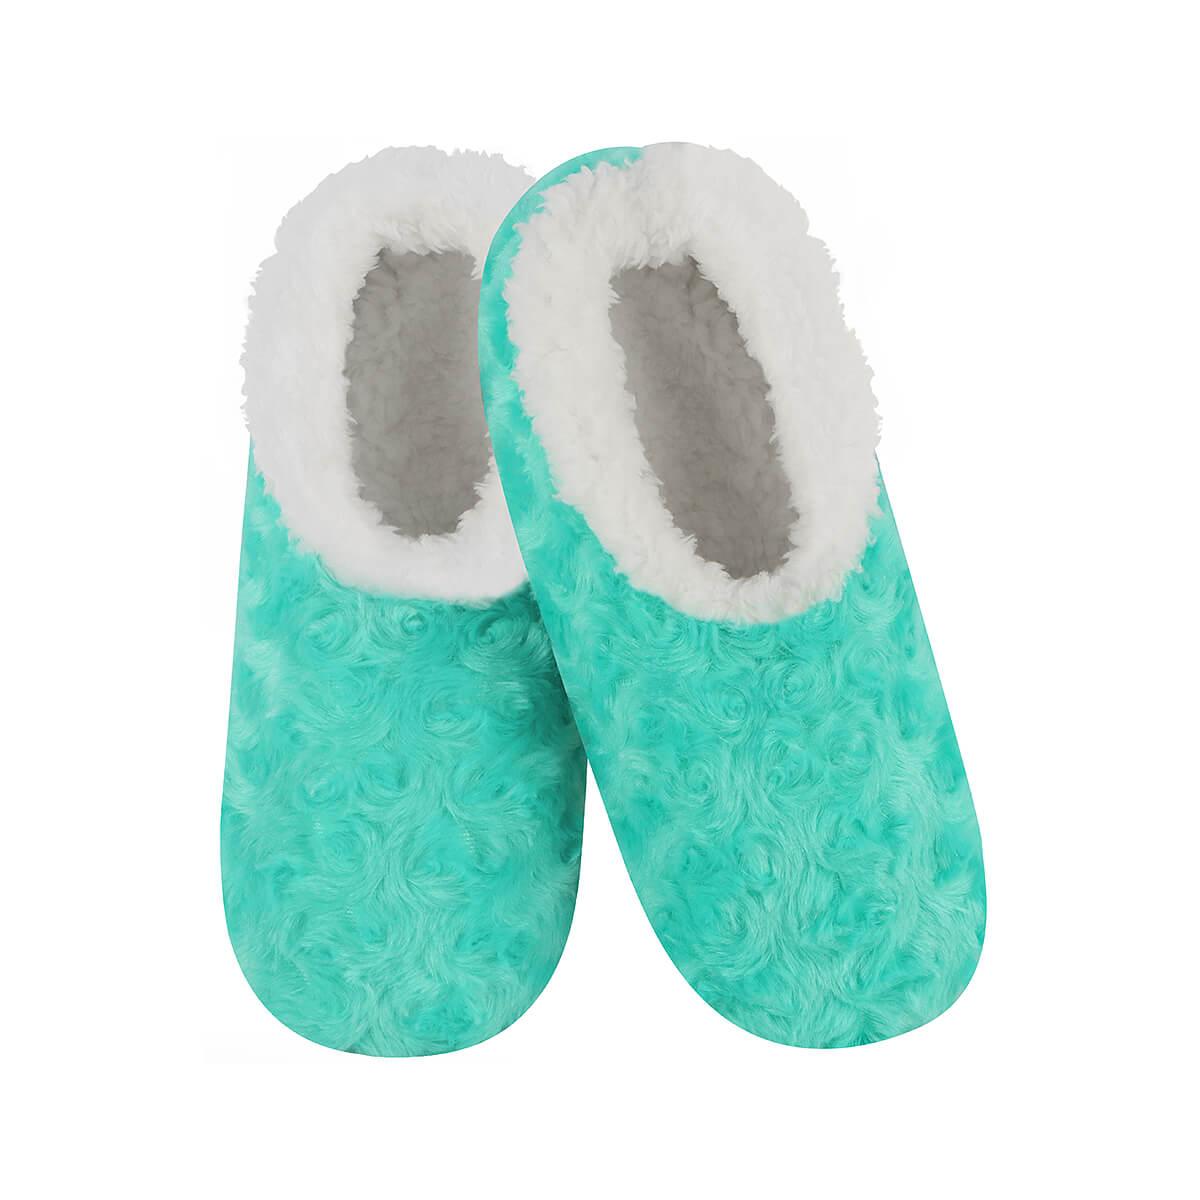  Women's Spring Bloom Snoozies Slippers